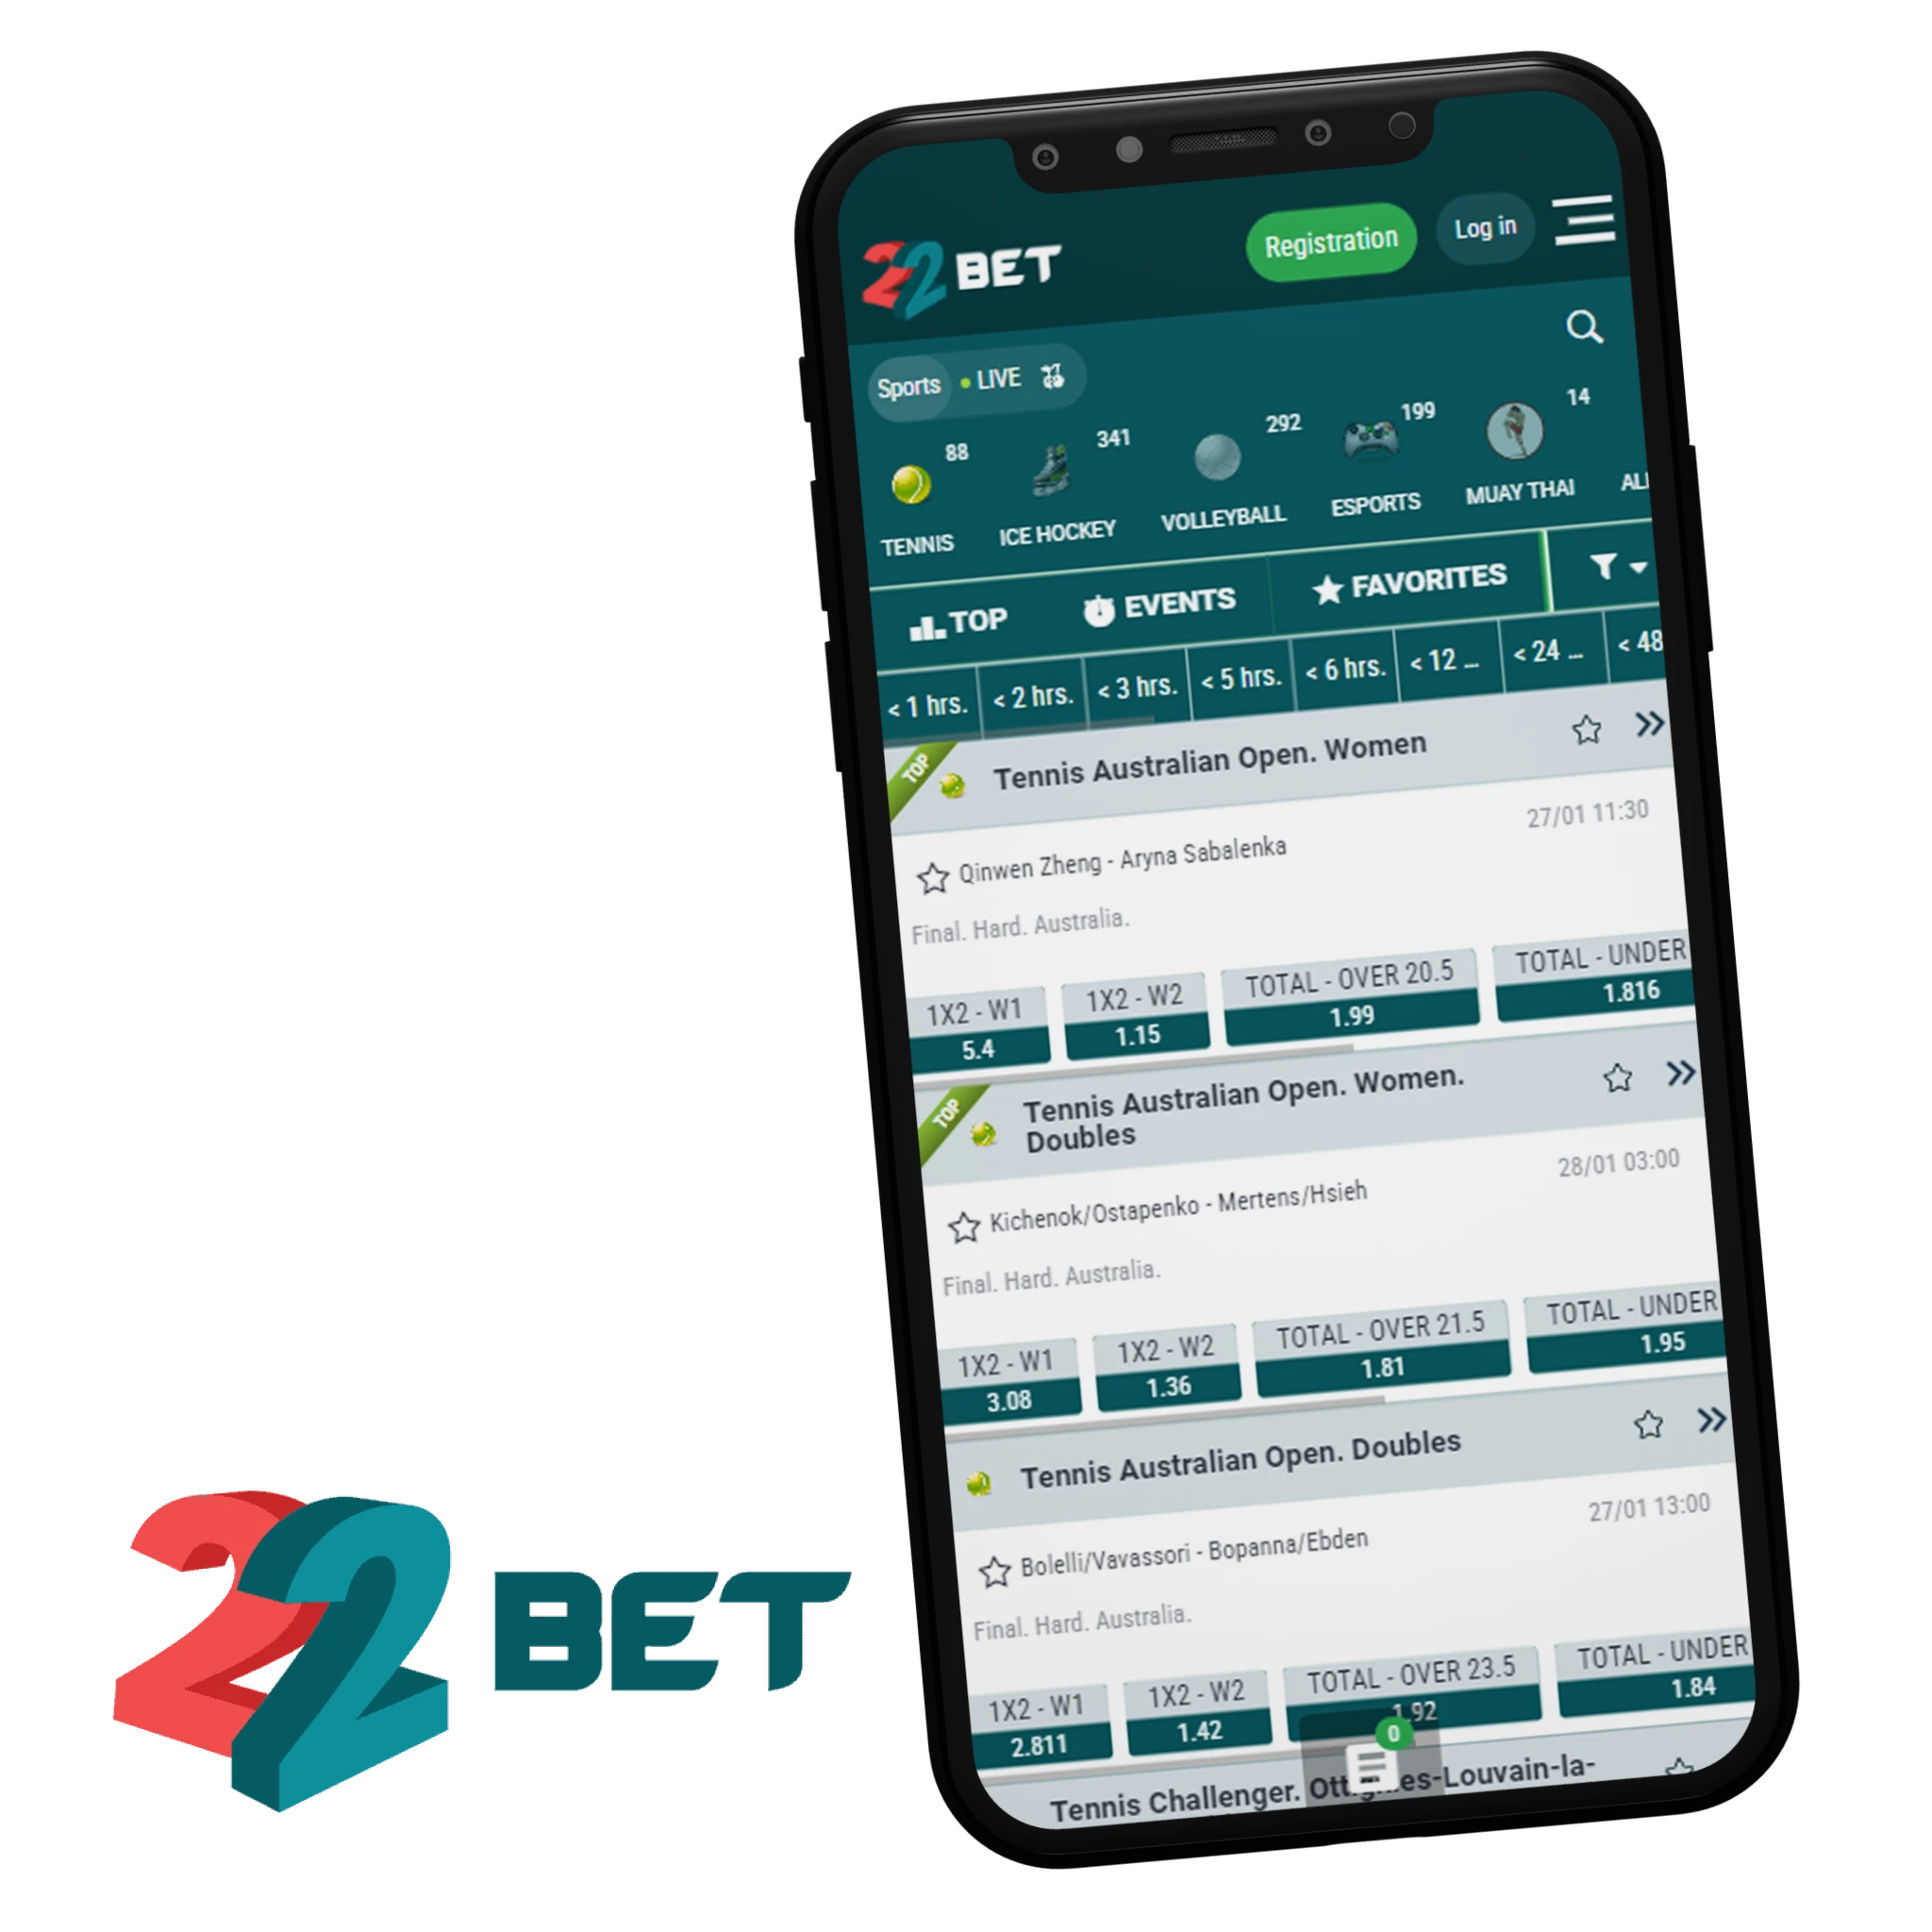 Online tennis betting is available for 22bet app users.